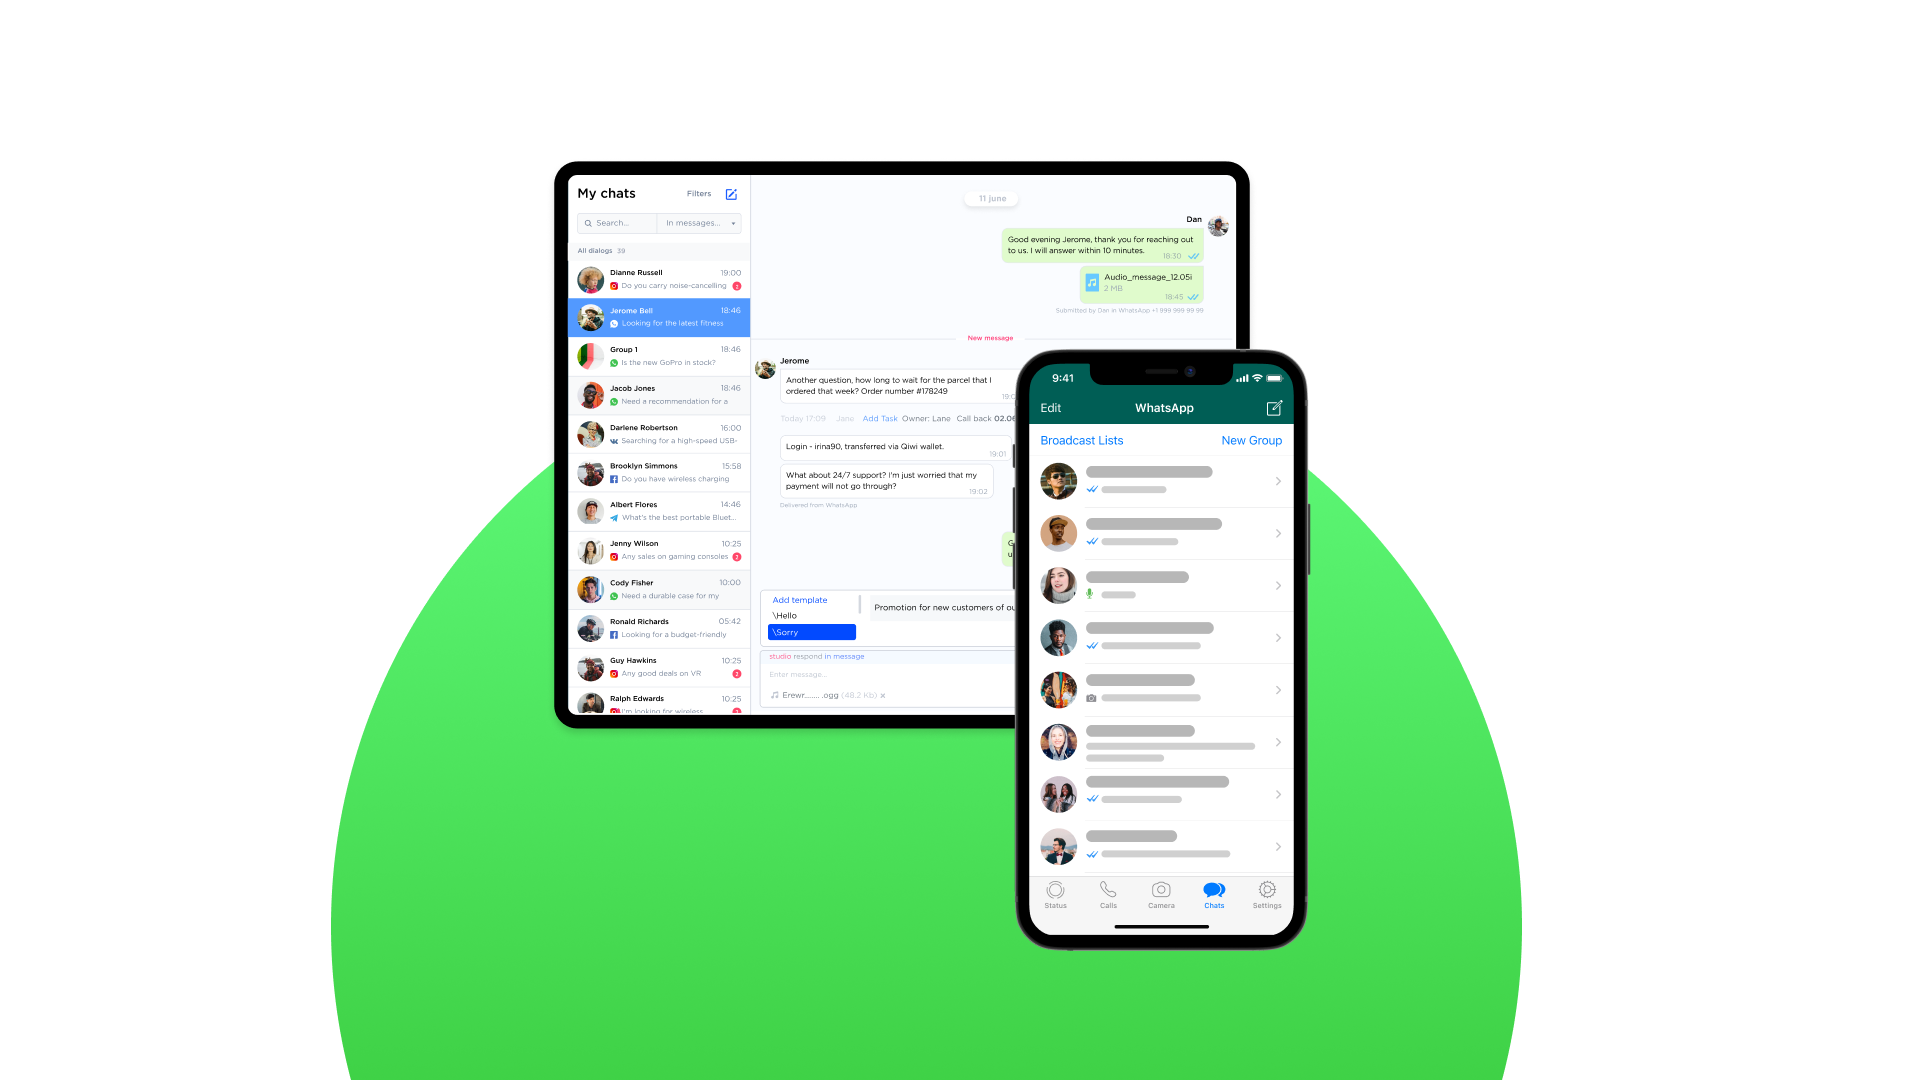 WhatsApp CRM integrations allow you to manage conversations and database in one interface